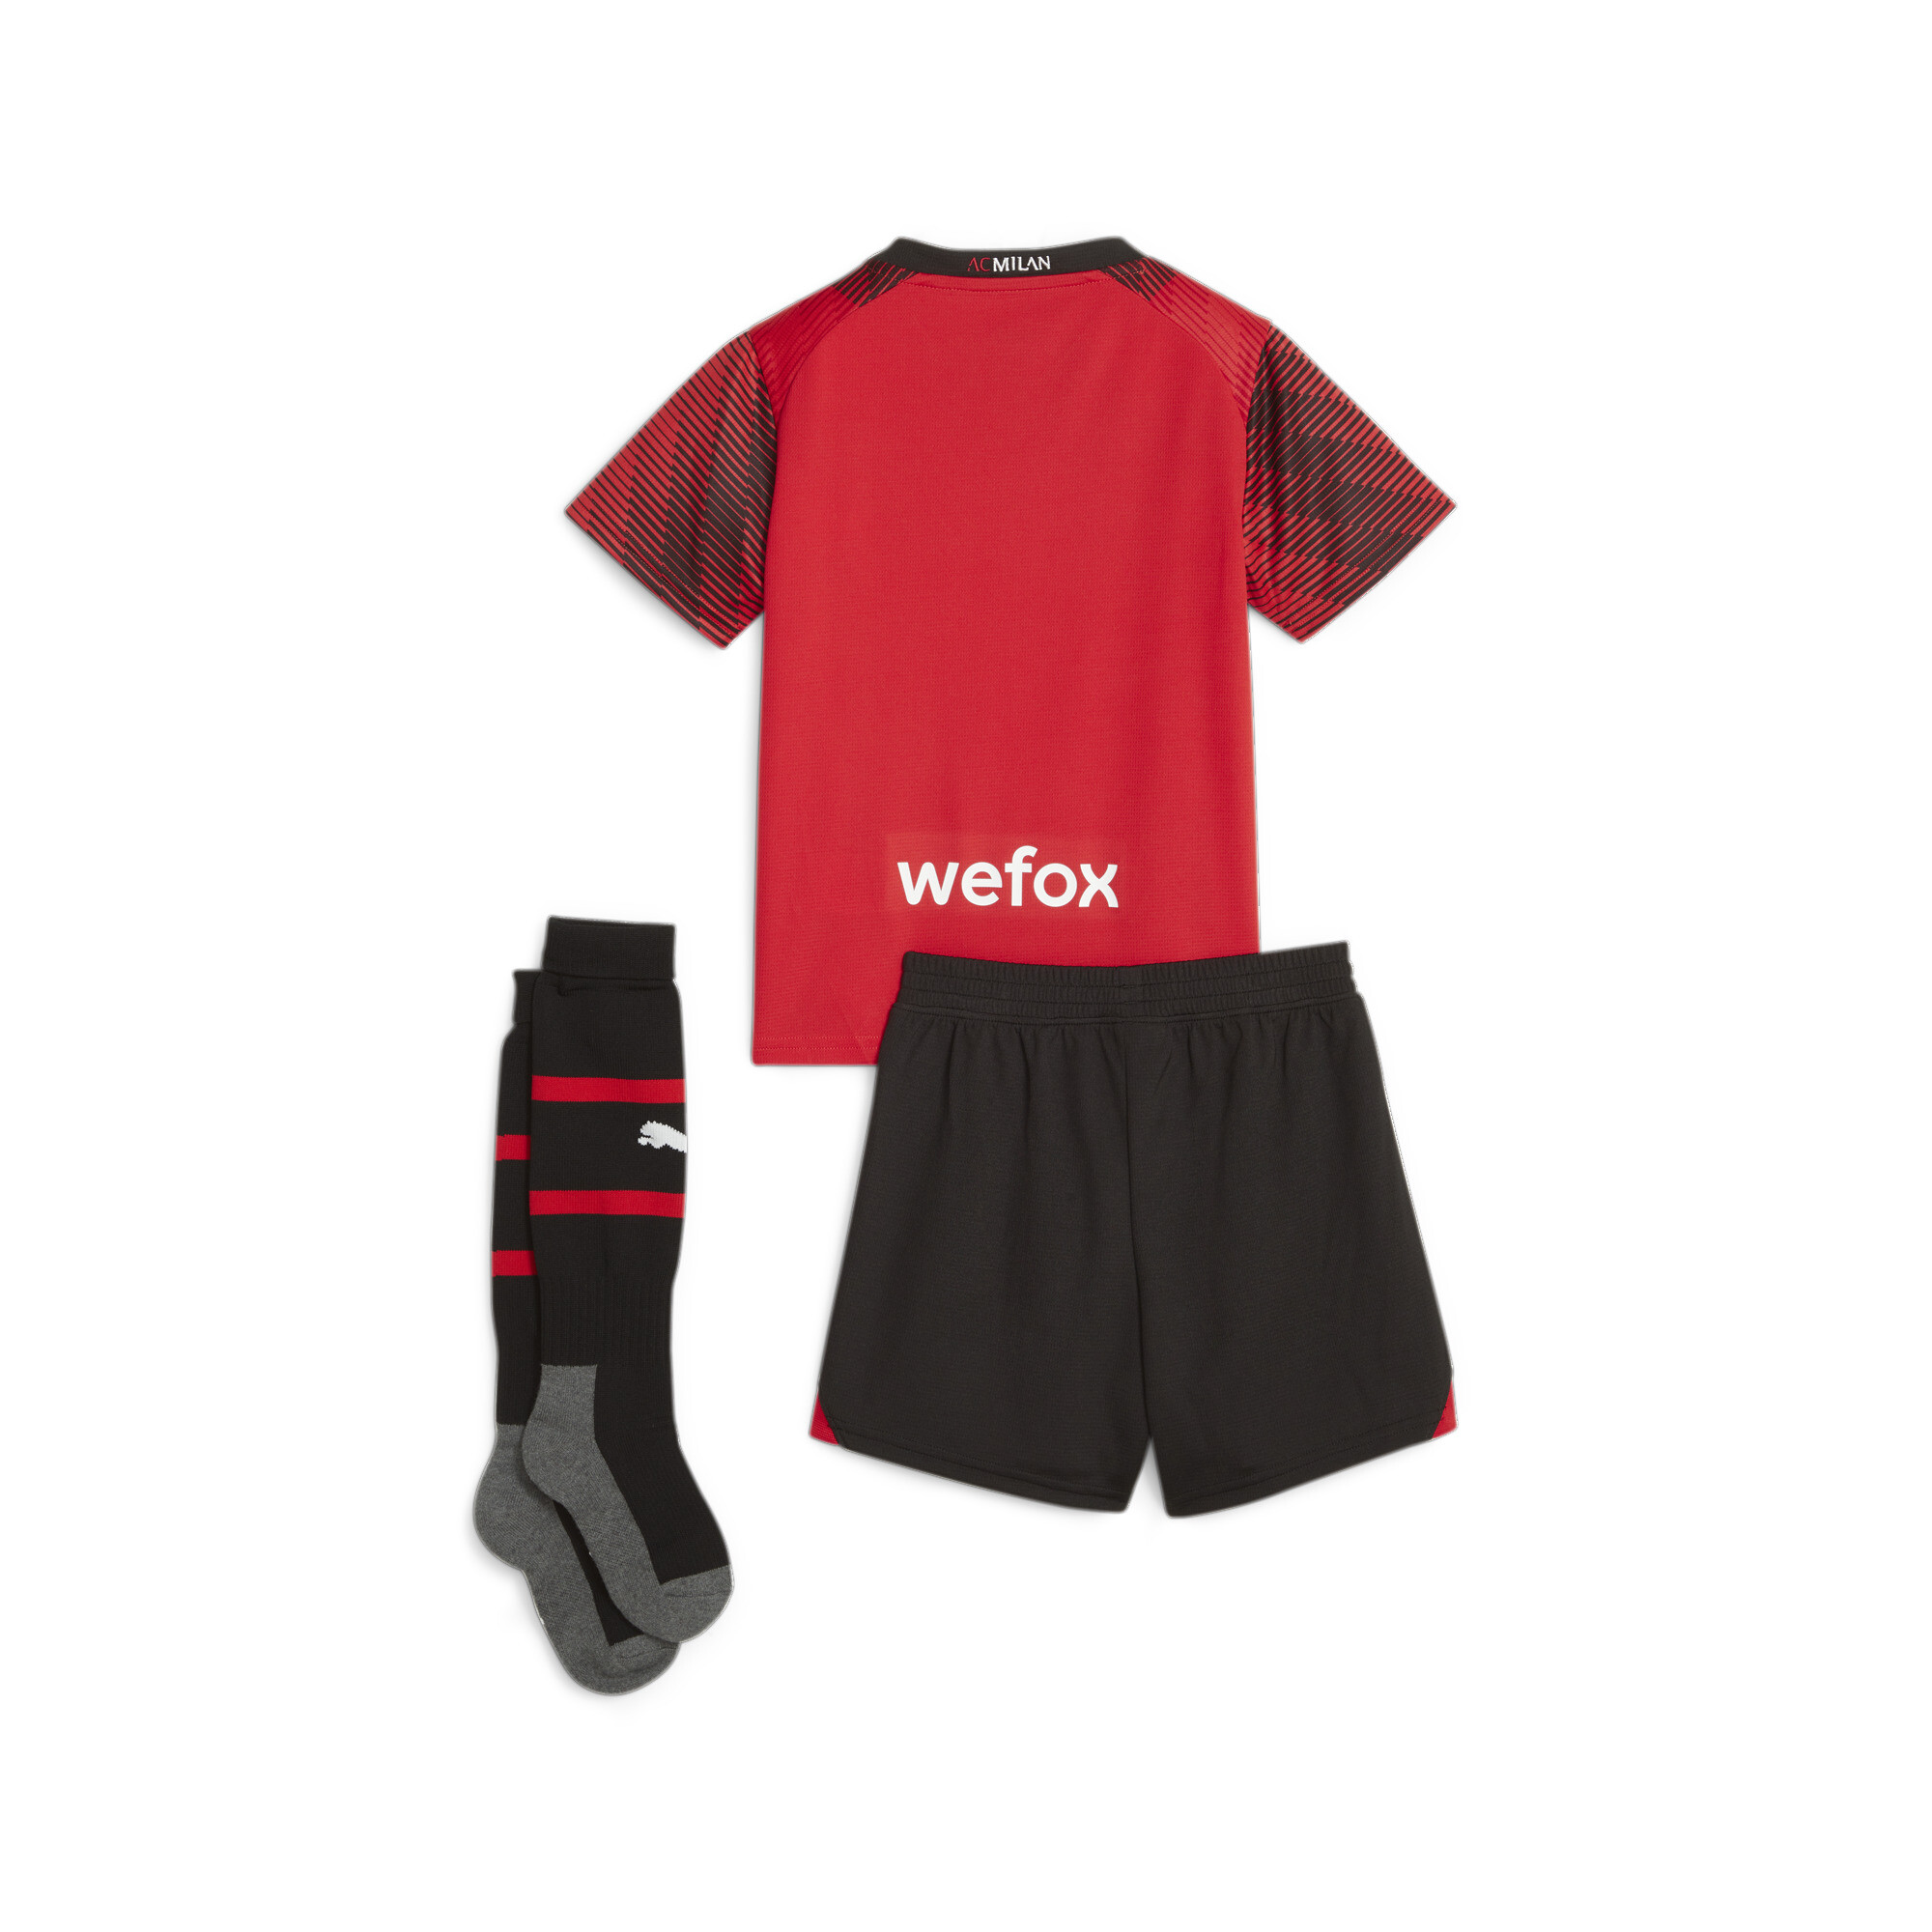 PUMA A.C. Milan 23/24 Home Mini Kit In Red, Size 1-2 Youth